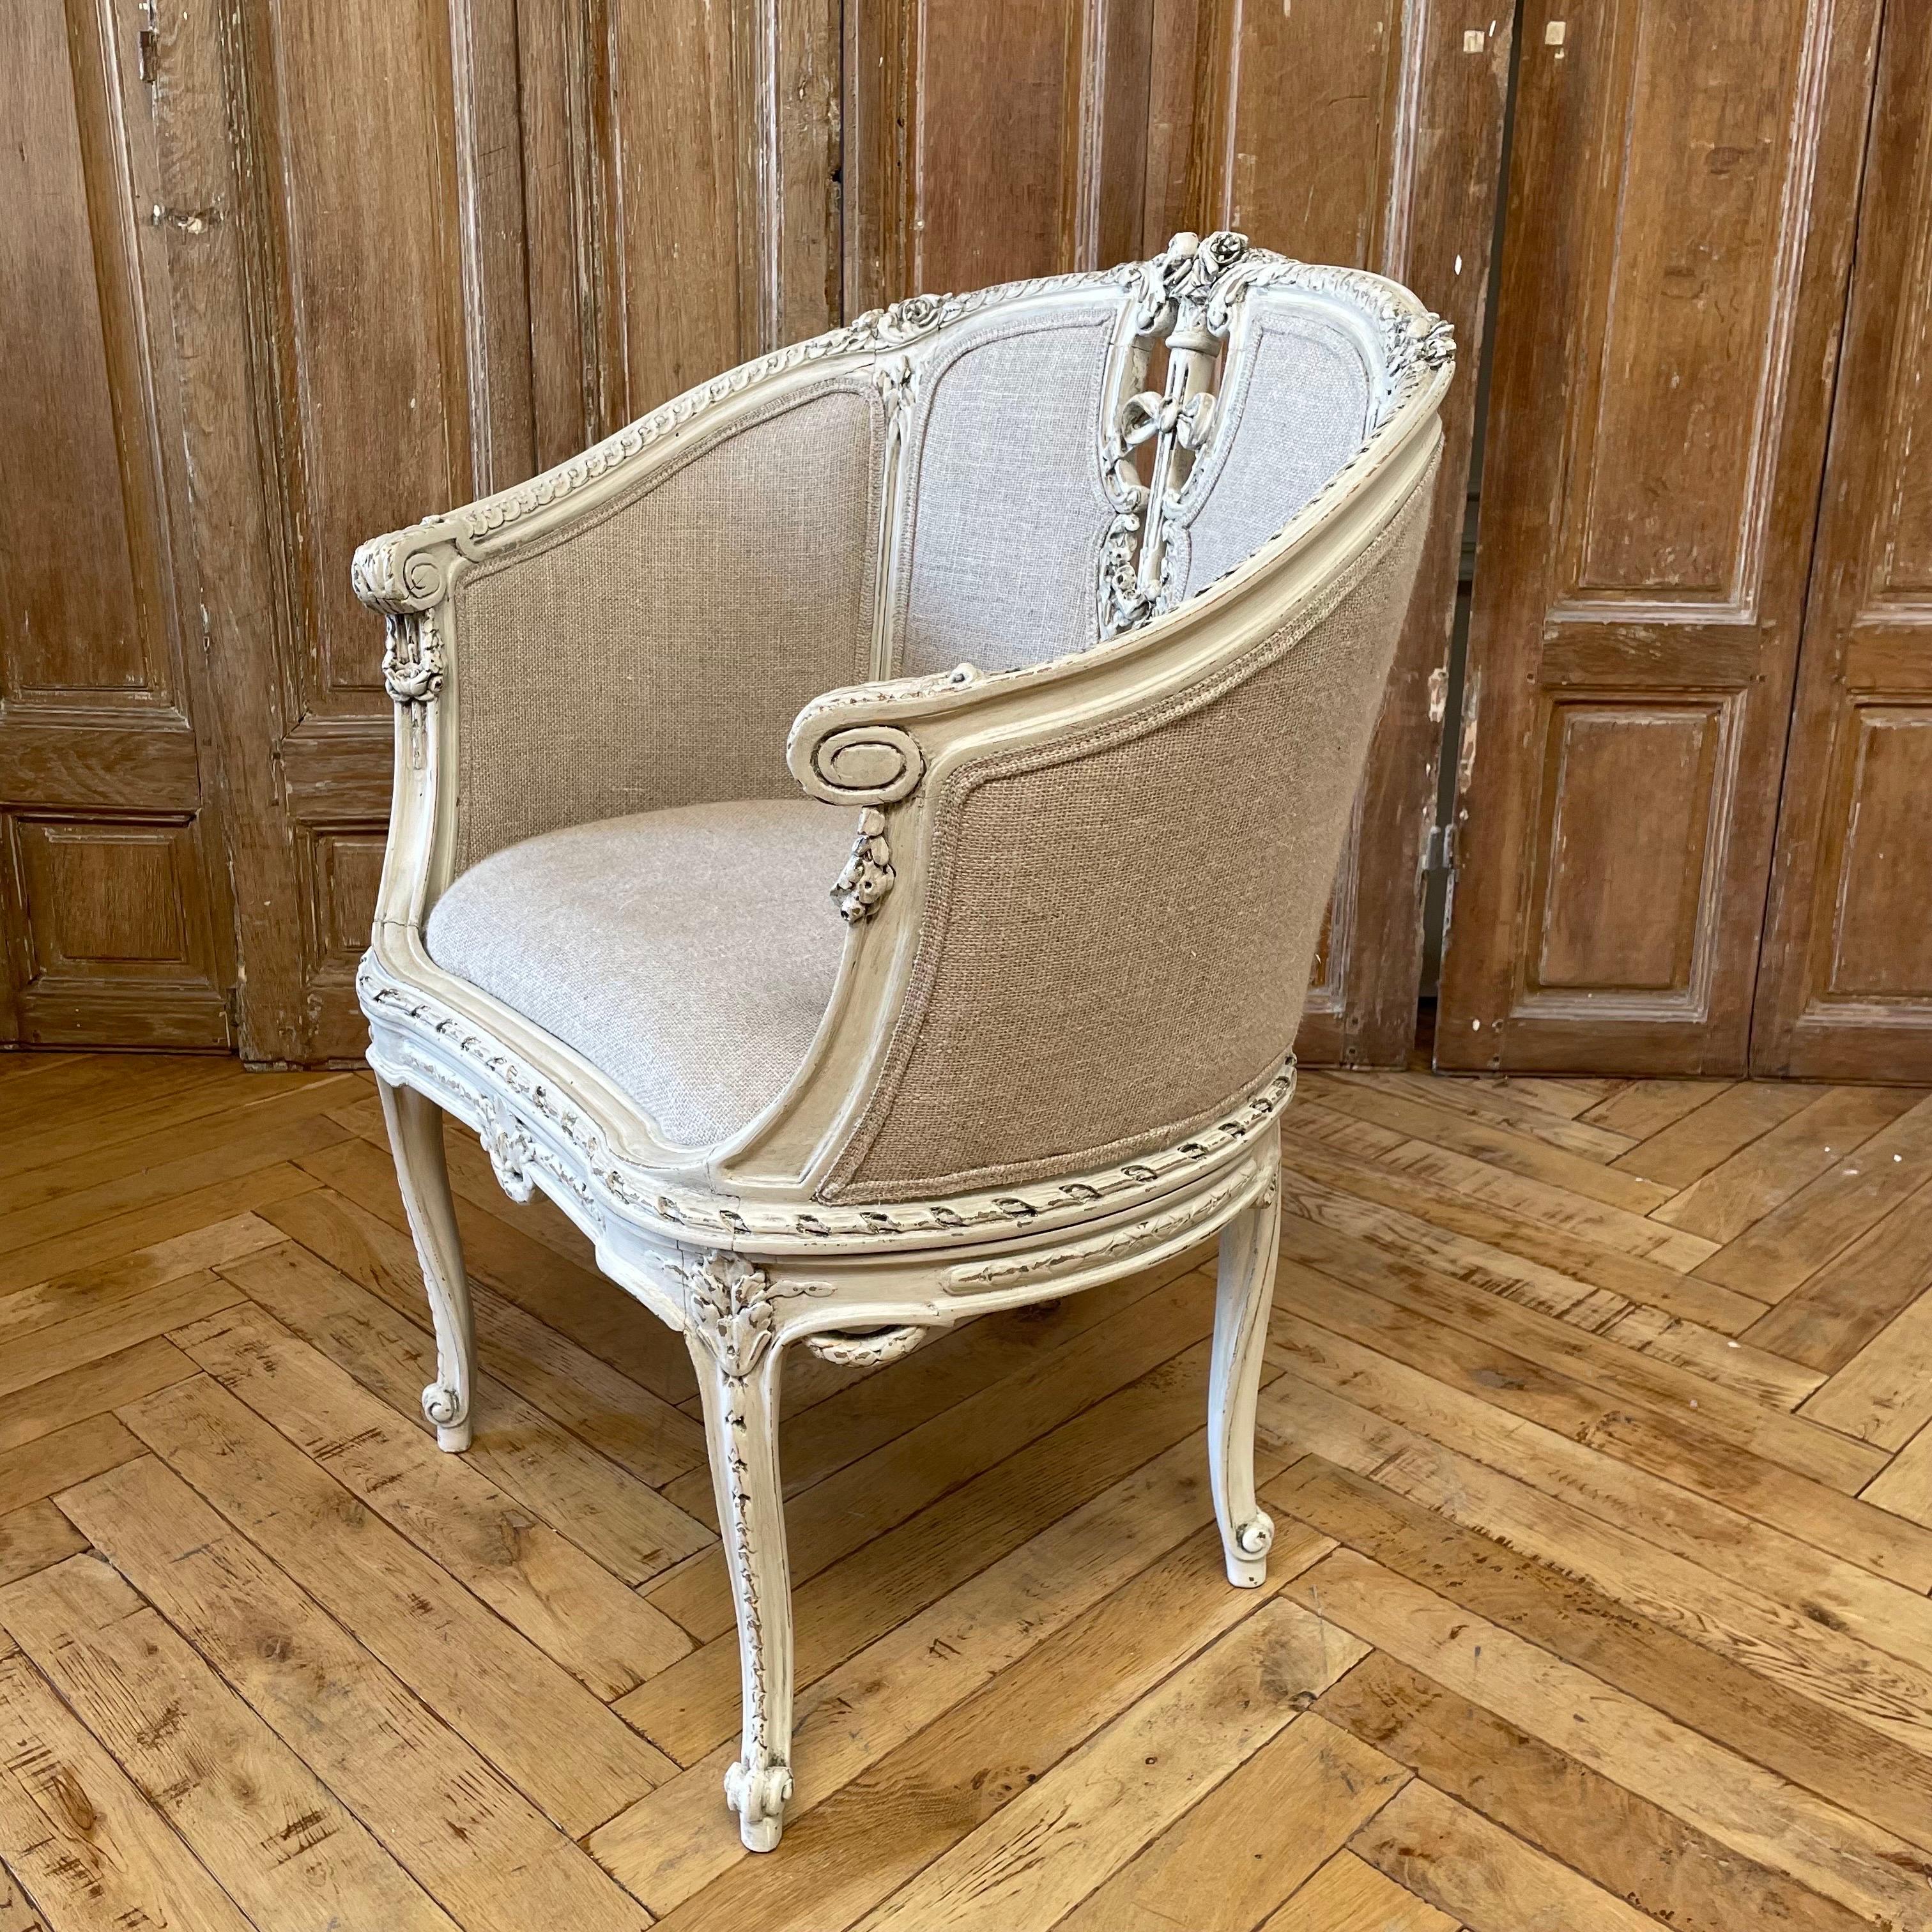 Custom Painted and Upholstered Louis XV style barrel chair.  Finished in our antique oyster white with subtle distressed edges and antique glazed patina.  Upholstered in our Irish Linen / flax color with burlap style weave. 
Solid and sturdy, ready